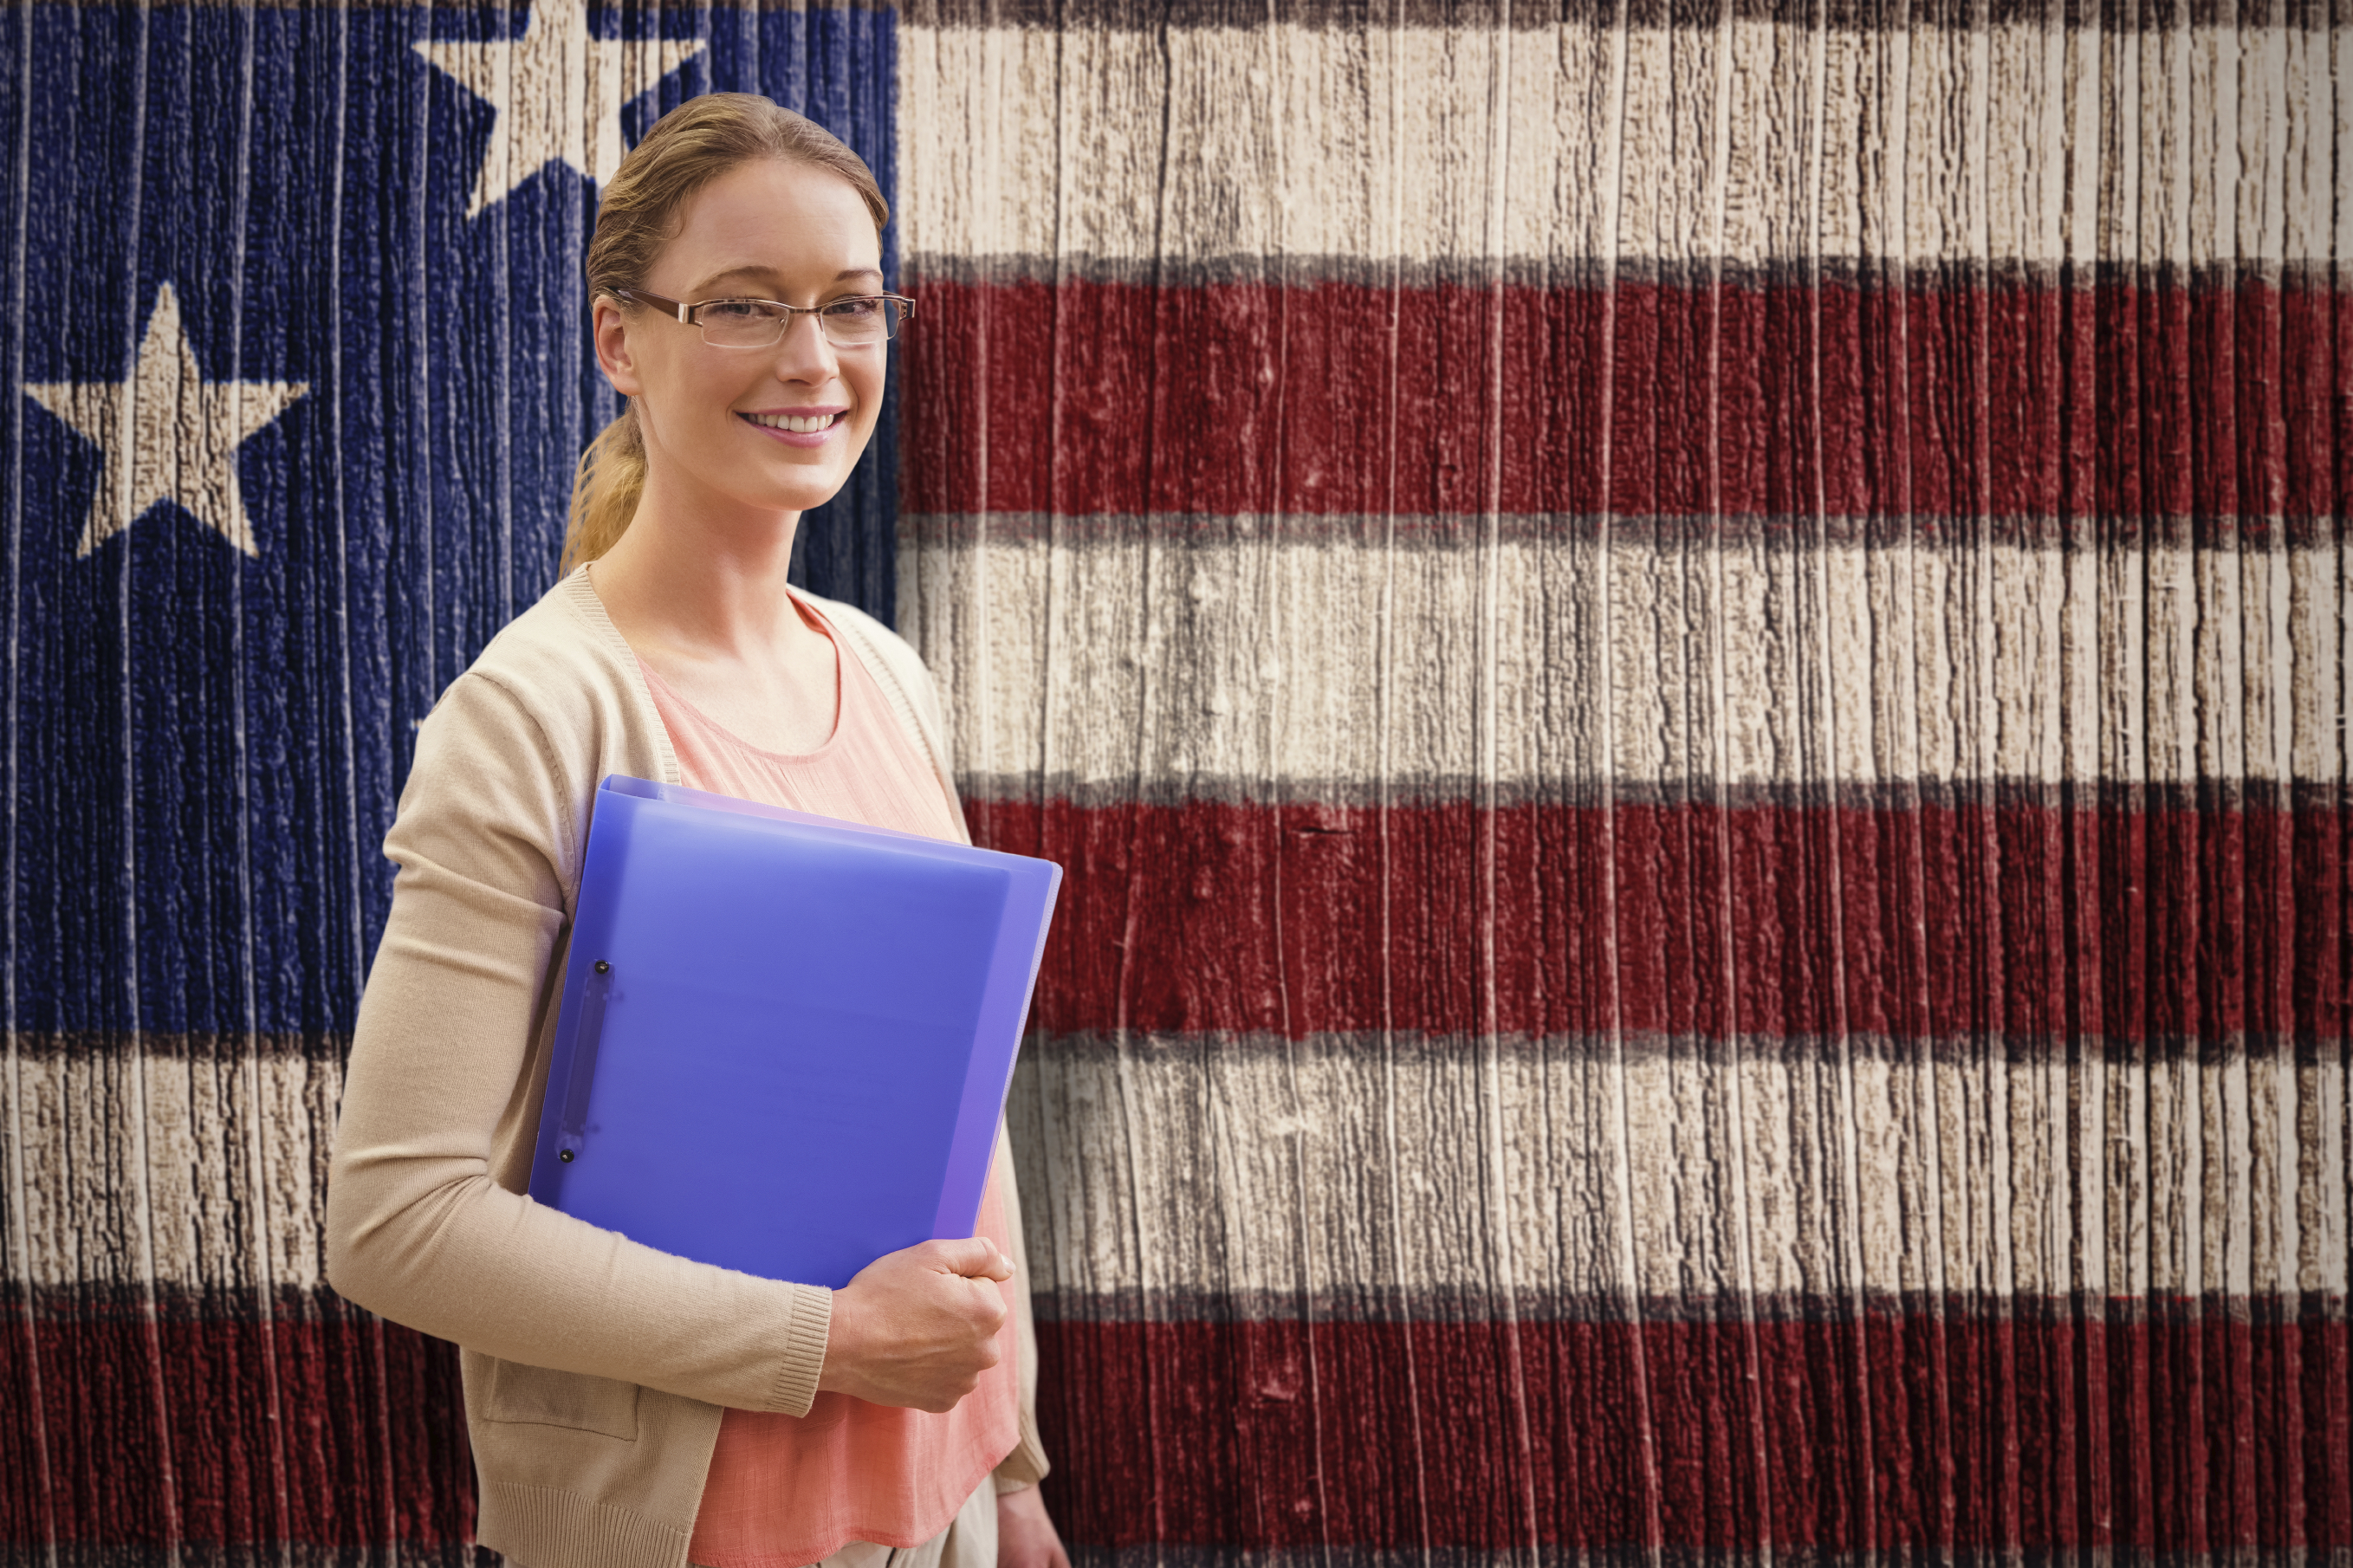 Semper Gumby! 4 Tips from the Military to Drive Your Job Hunt